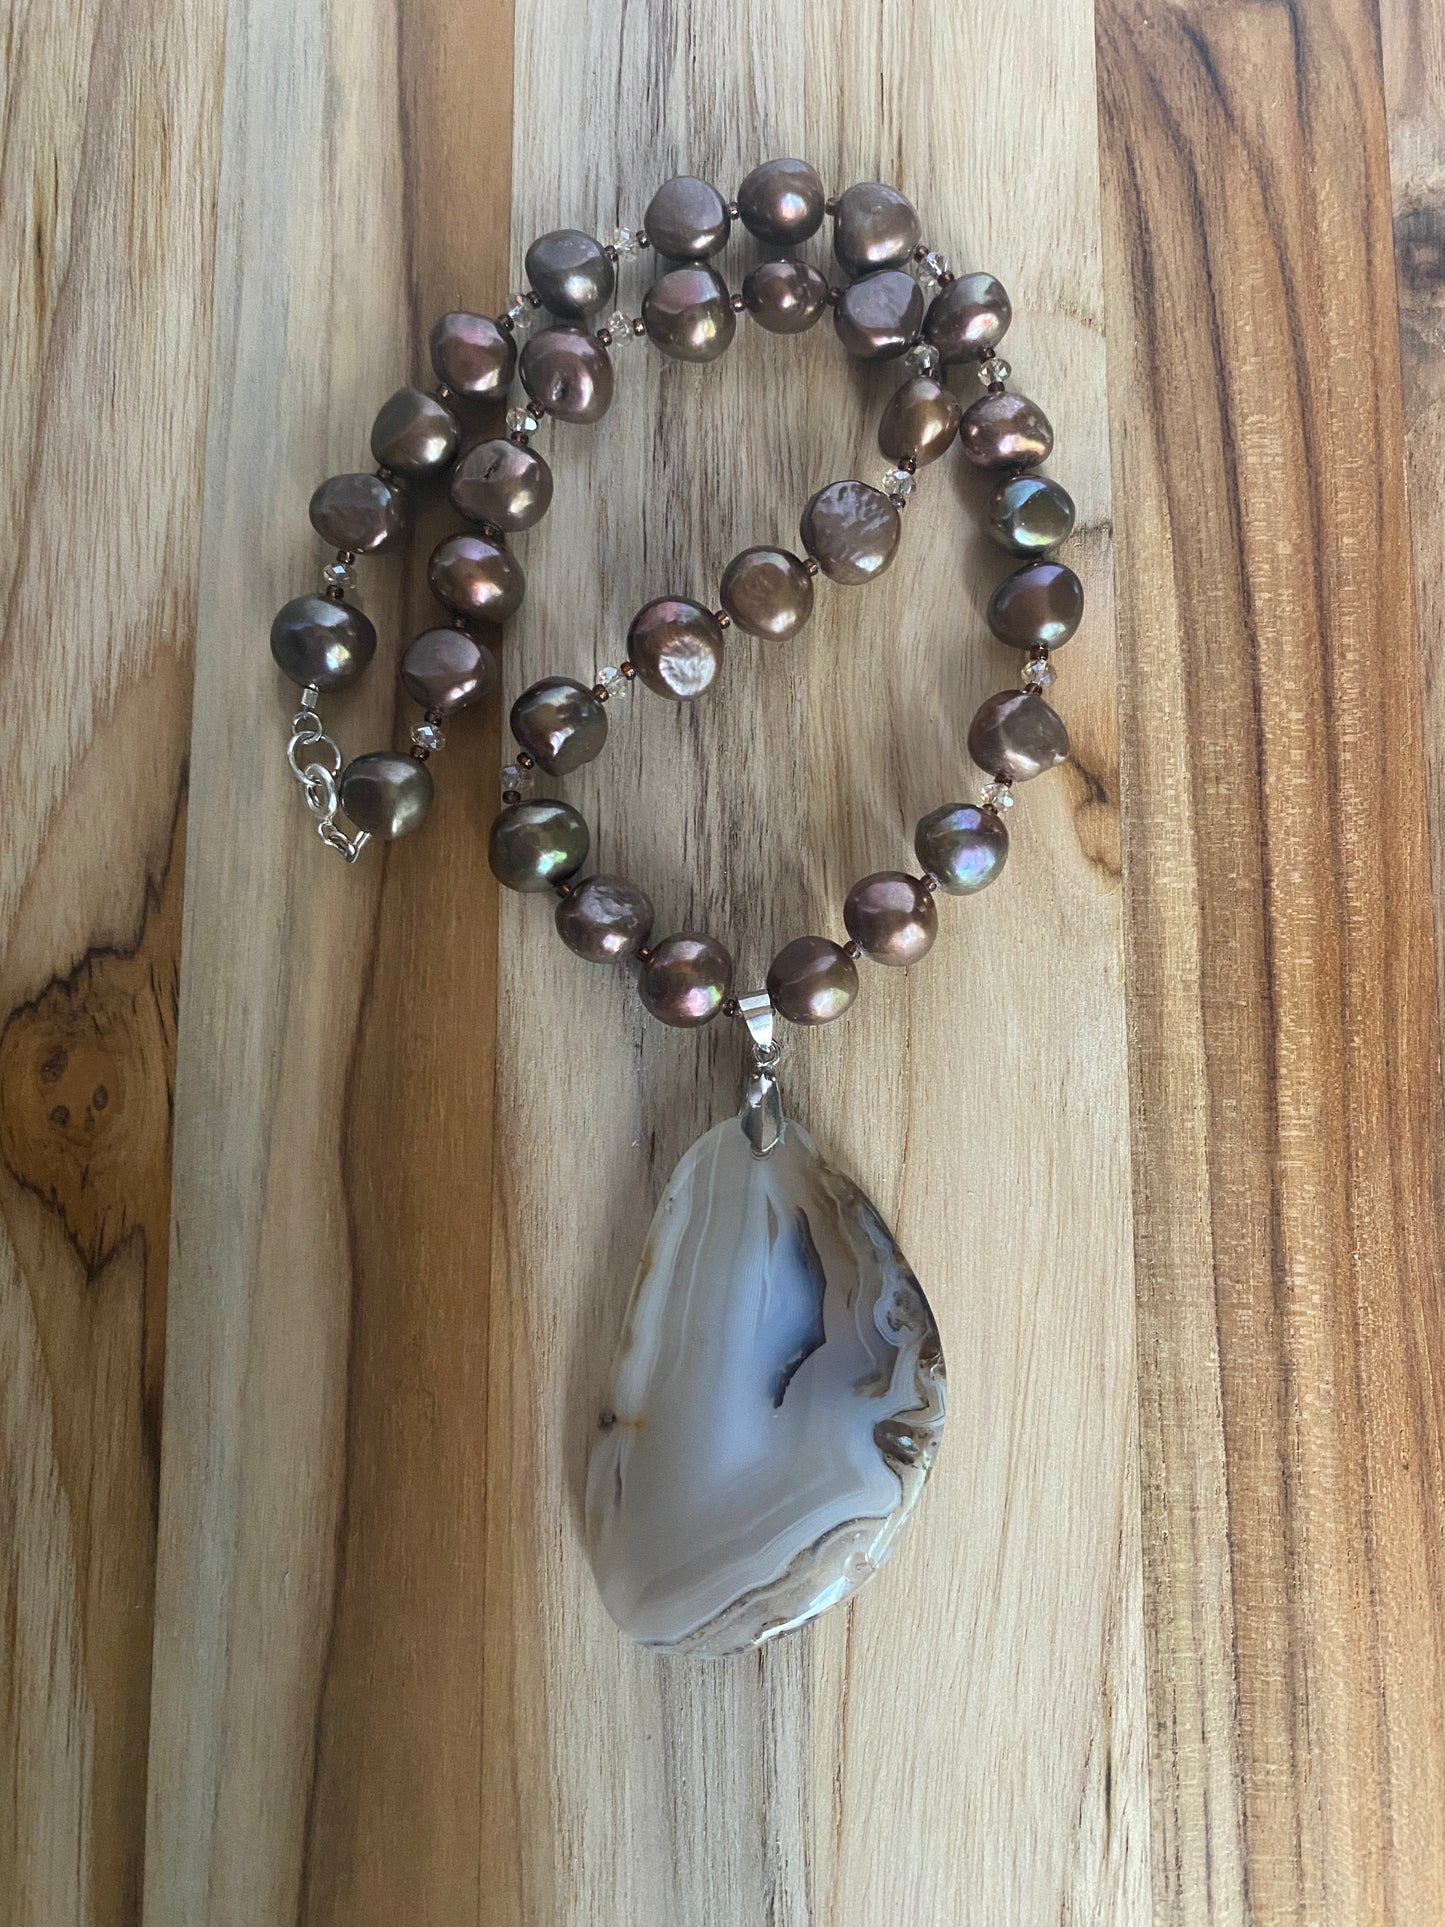 18.5" Agate Slice Pendant Necklace with Brown Freshwater Pearls